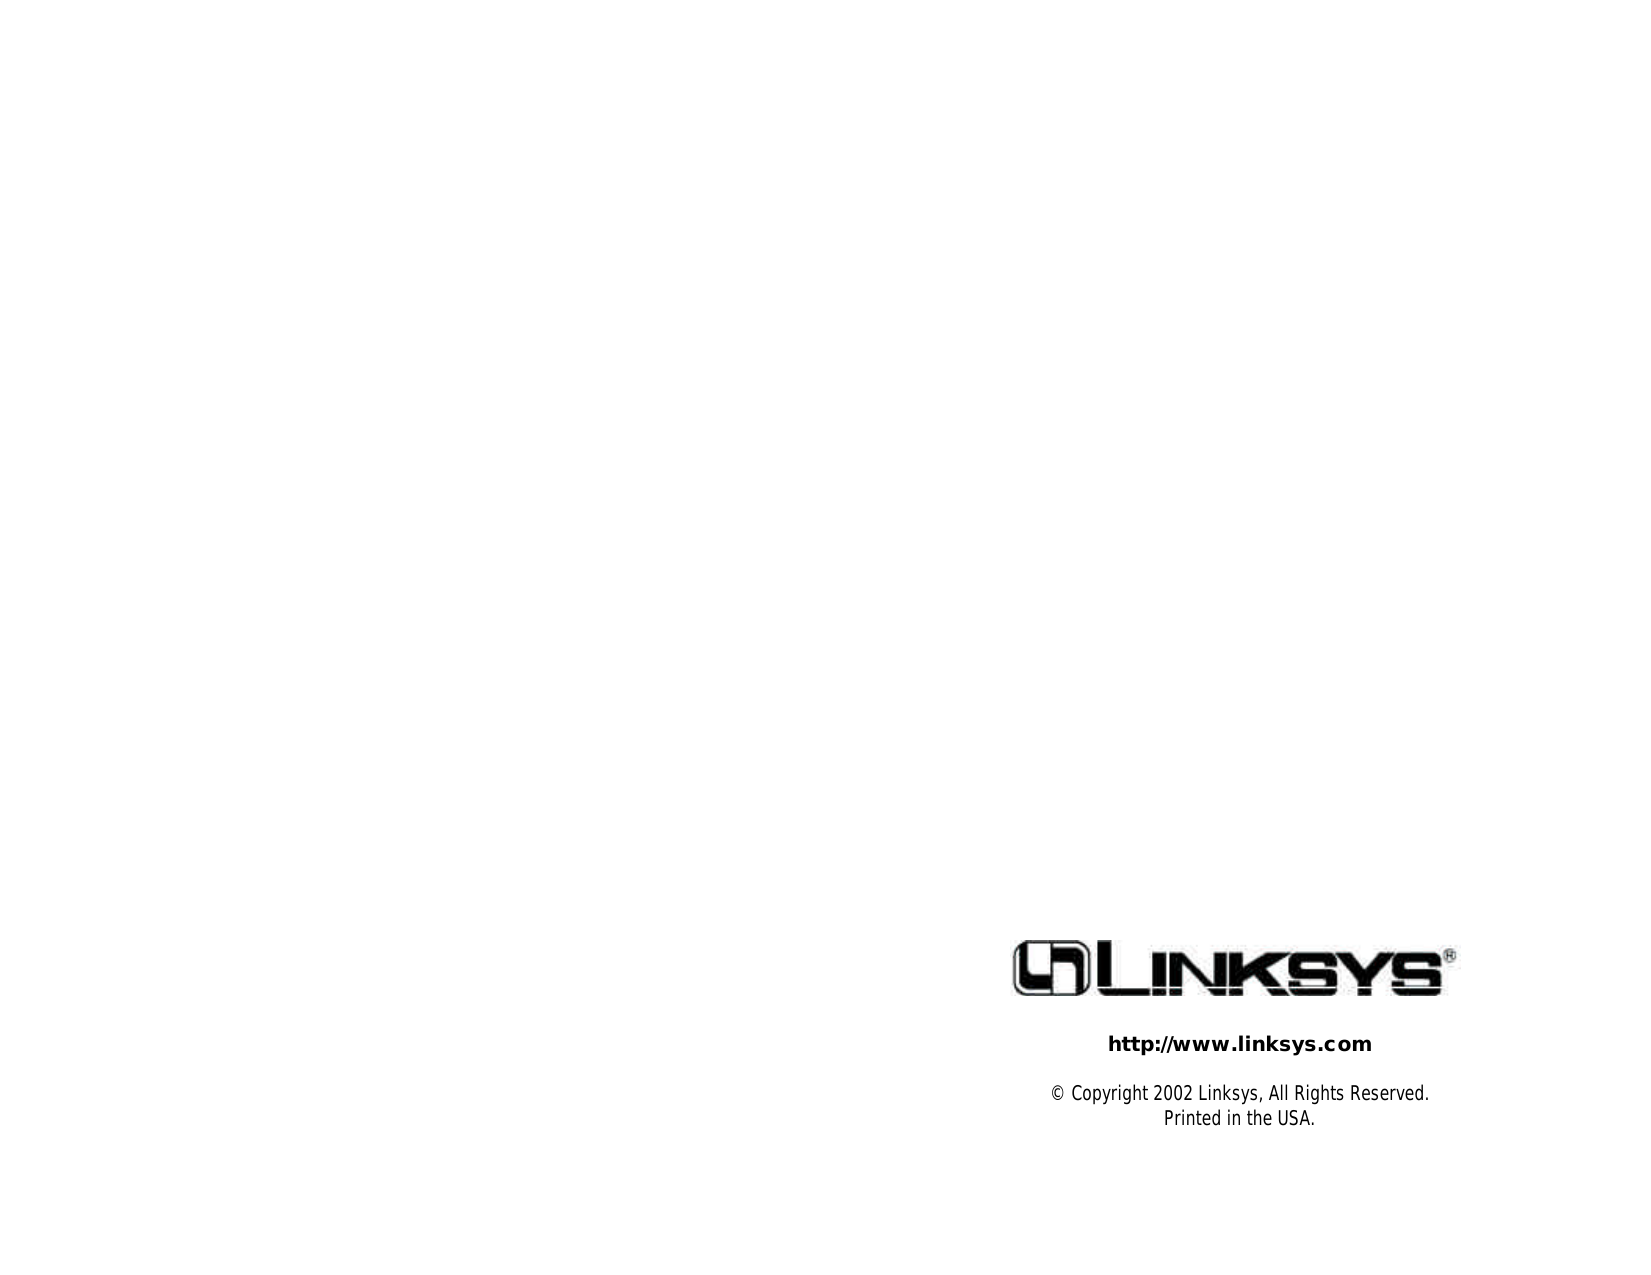 © Copyright 2002 Linksys, All Rights Reserved.Printed in the USA.http://www.linksys.com